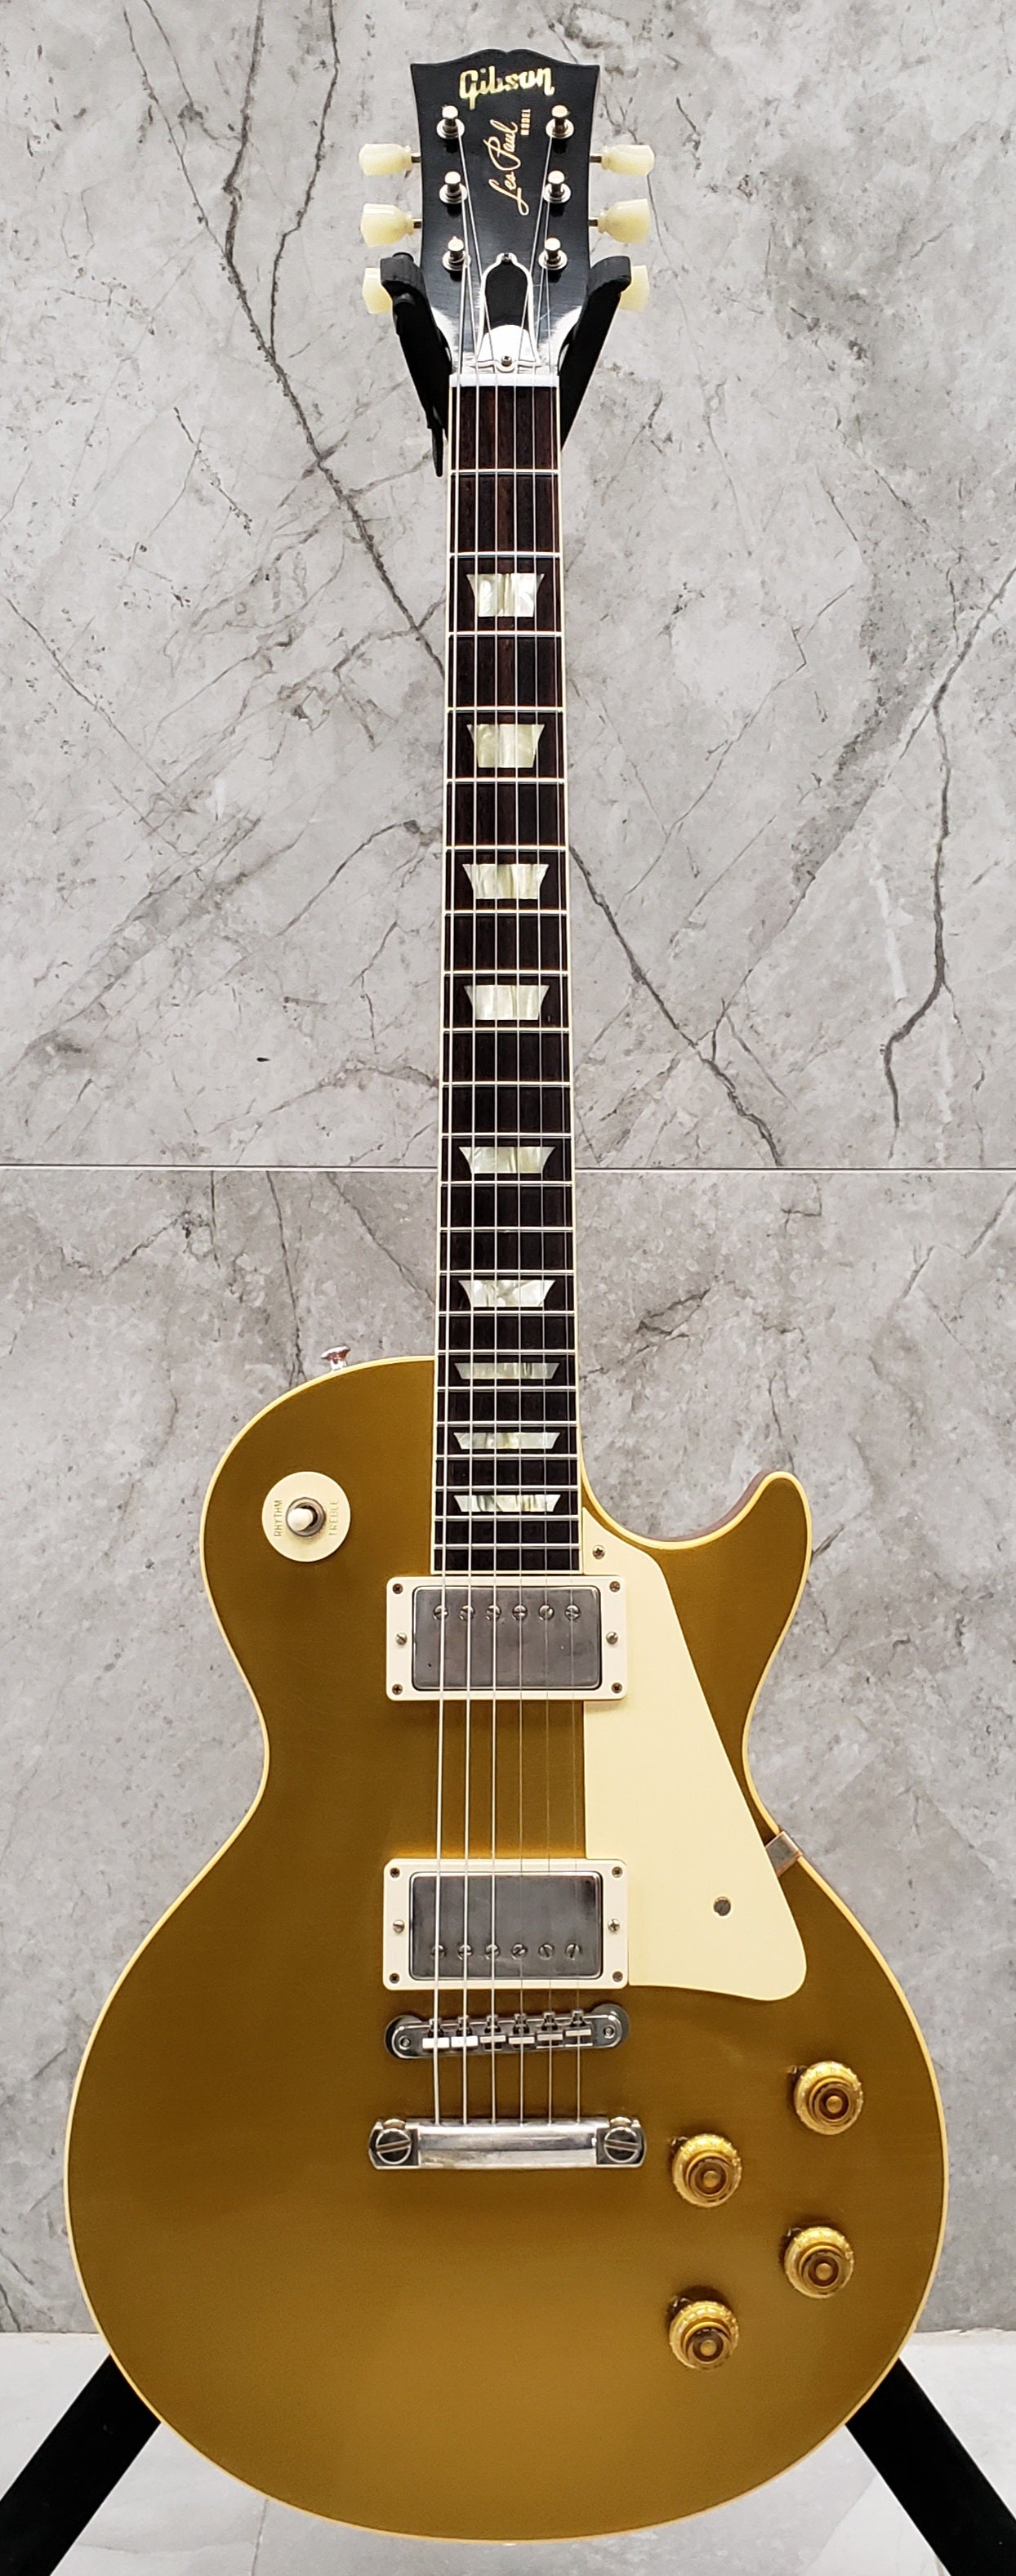 Gibson Custom Shop Murphy Lab 1957 Les Paul Goldtop Ultra Light Aged - Double Gold LPR57ULDGNH SERIAL NUMBER 72770 - 8.8 LBS